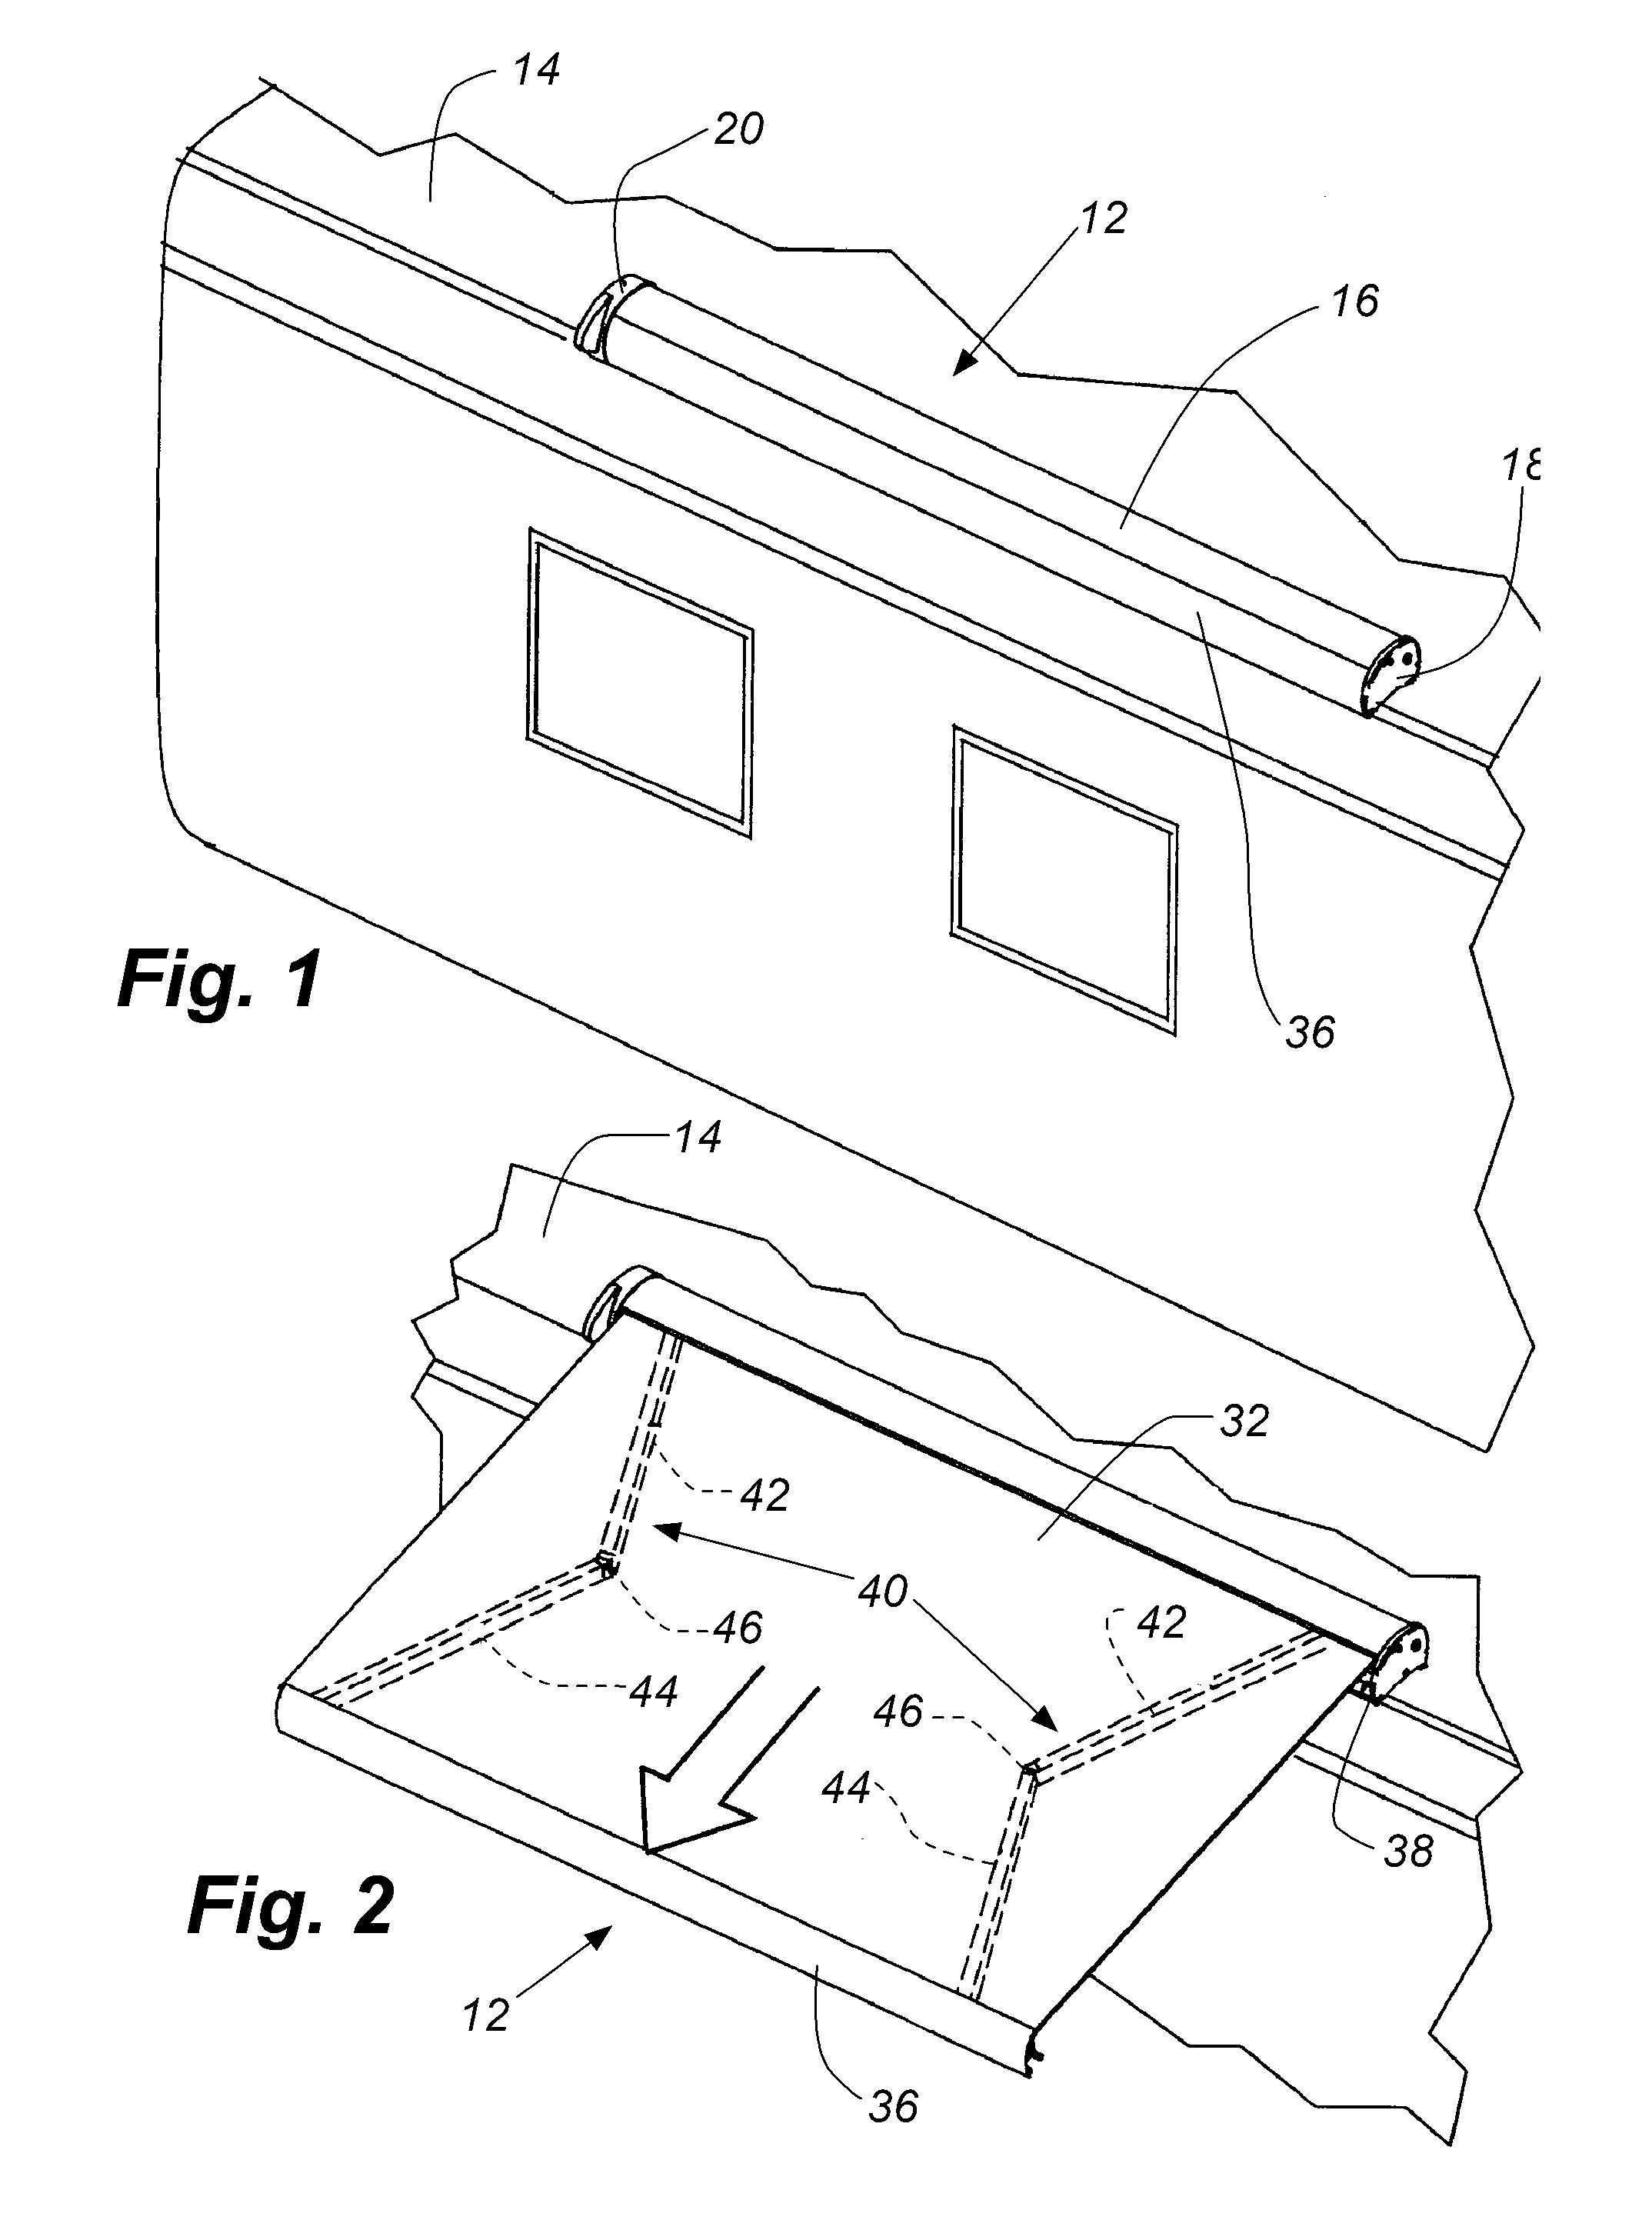 Manual override system for motor-driven retractable awning